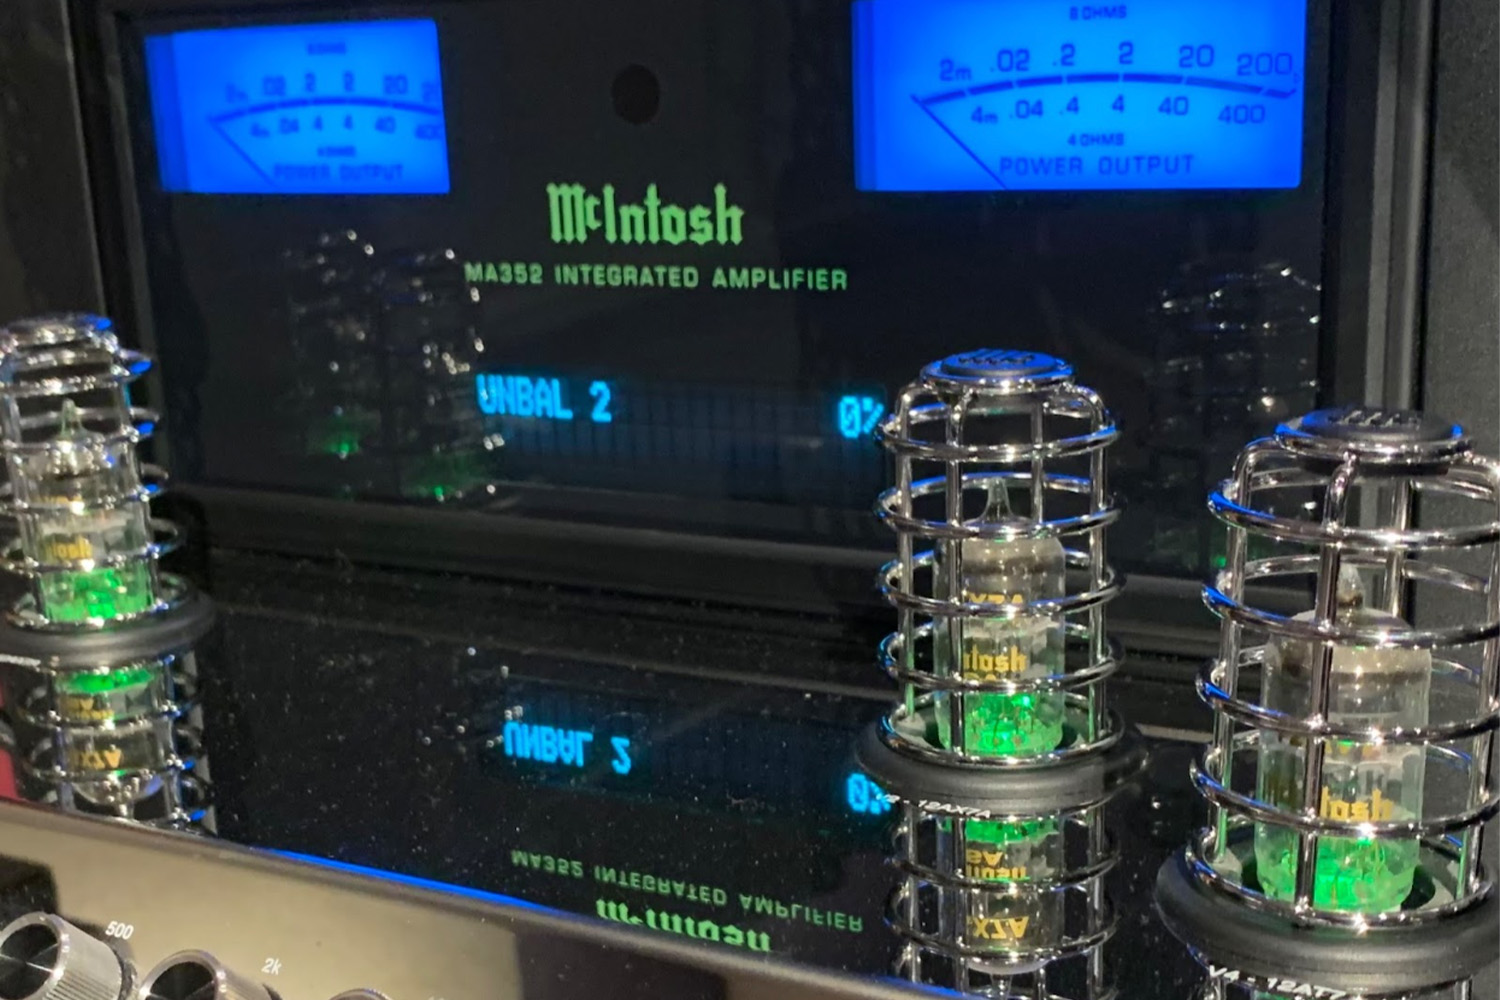 Modern McIntosh in a vintage audio equipment style